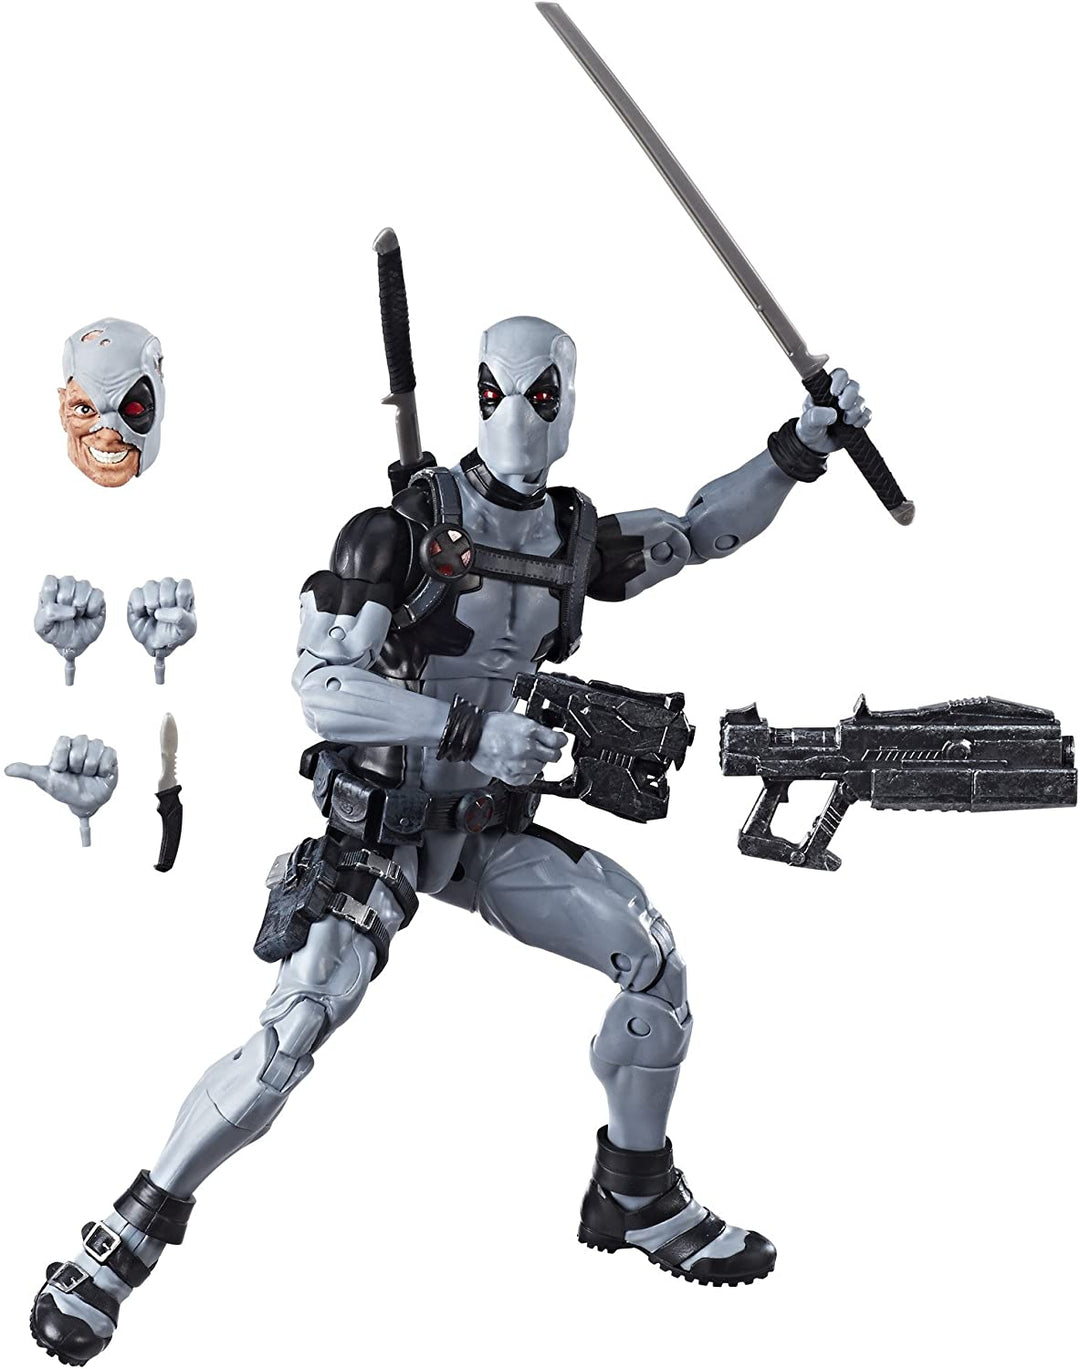 Marvel E1974 Hasbro Legends Series 12" Deadpool Action Figure From Uncanny X-Force Comics with Blaster/Weapon Accessories & 30 Points Of Articulation